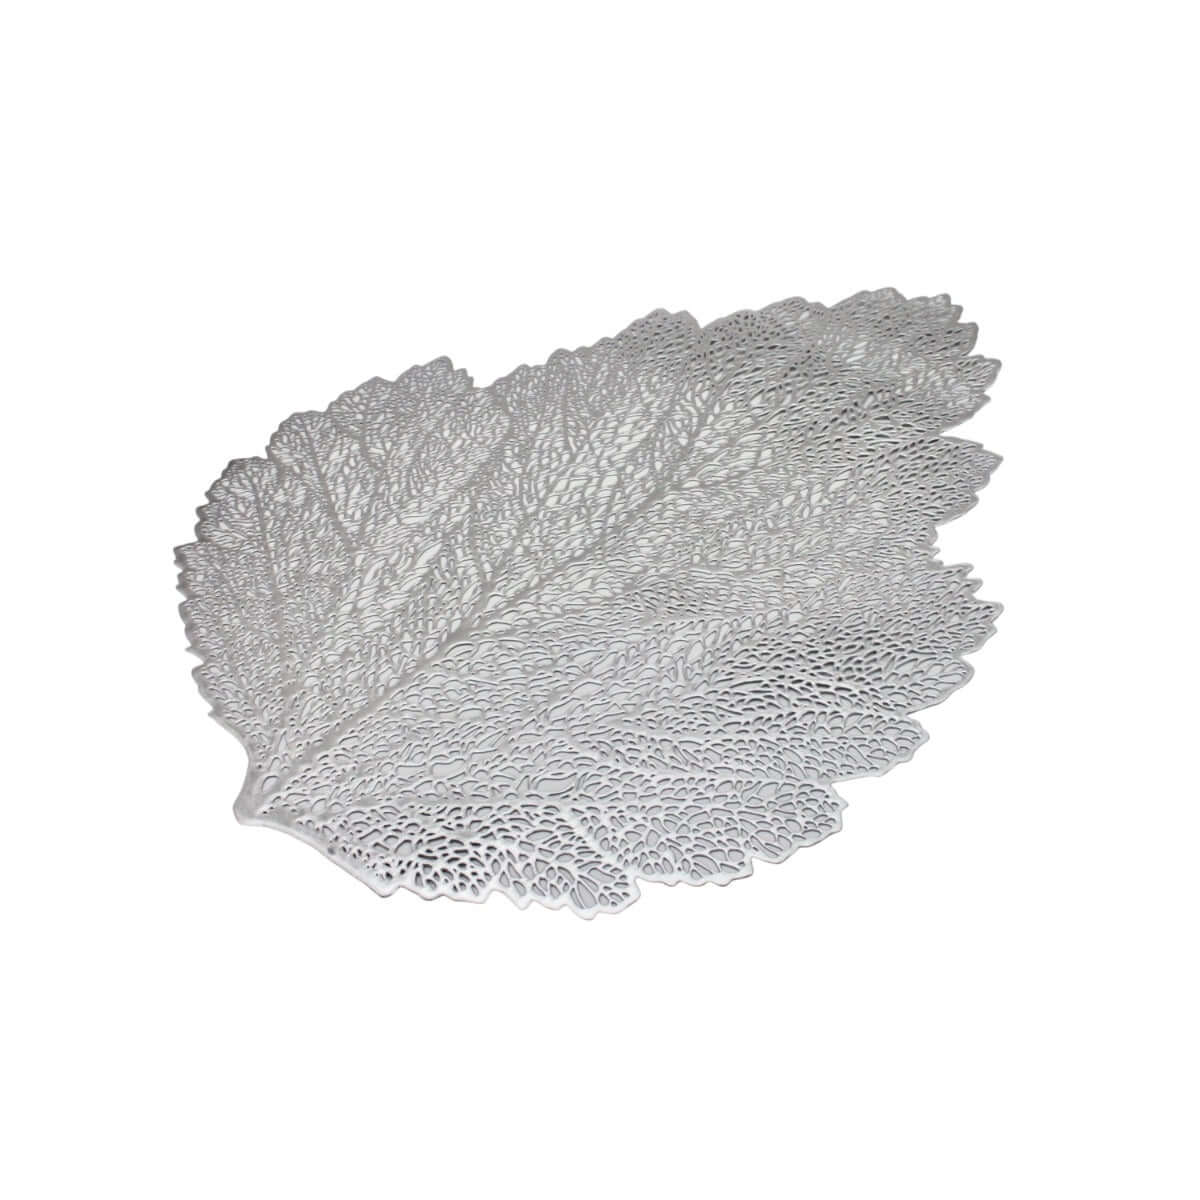 18" x 14" | Silver Leaf Placemat | 10 Count - Yom Tov Settings